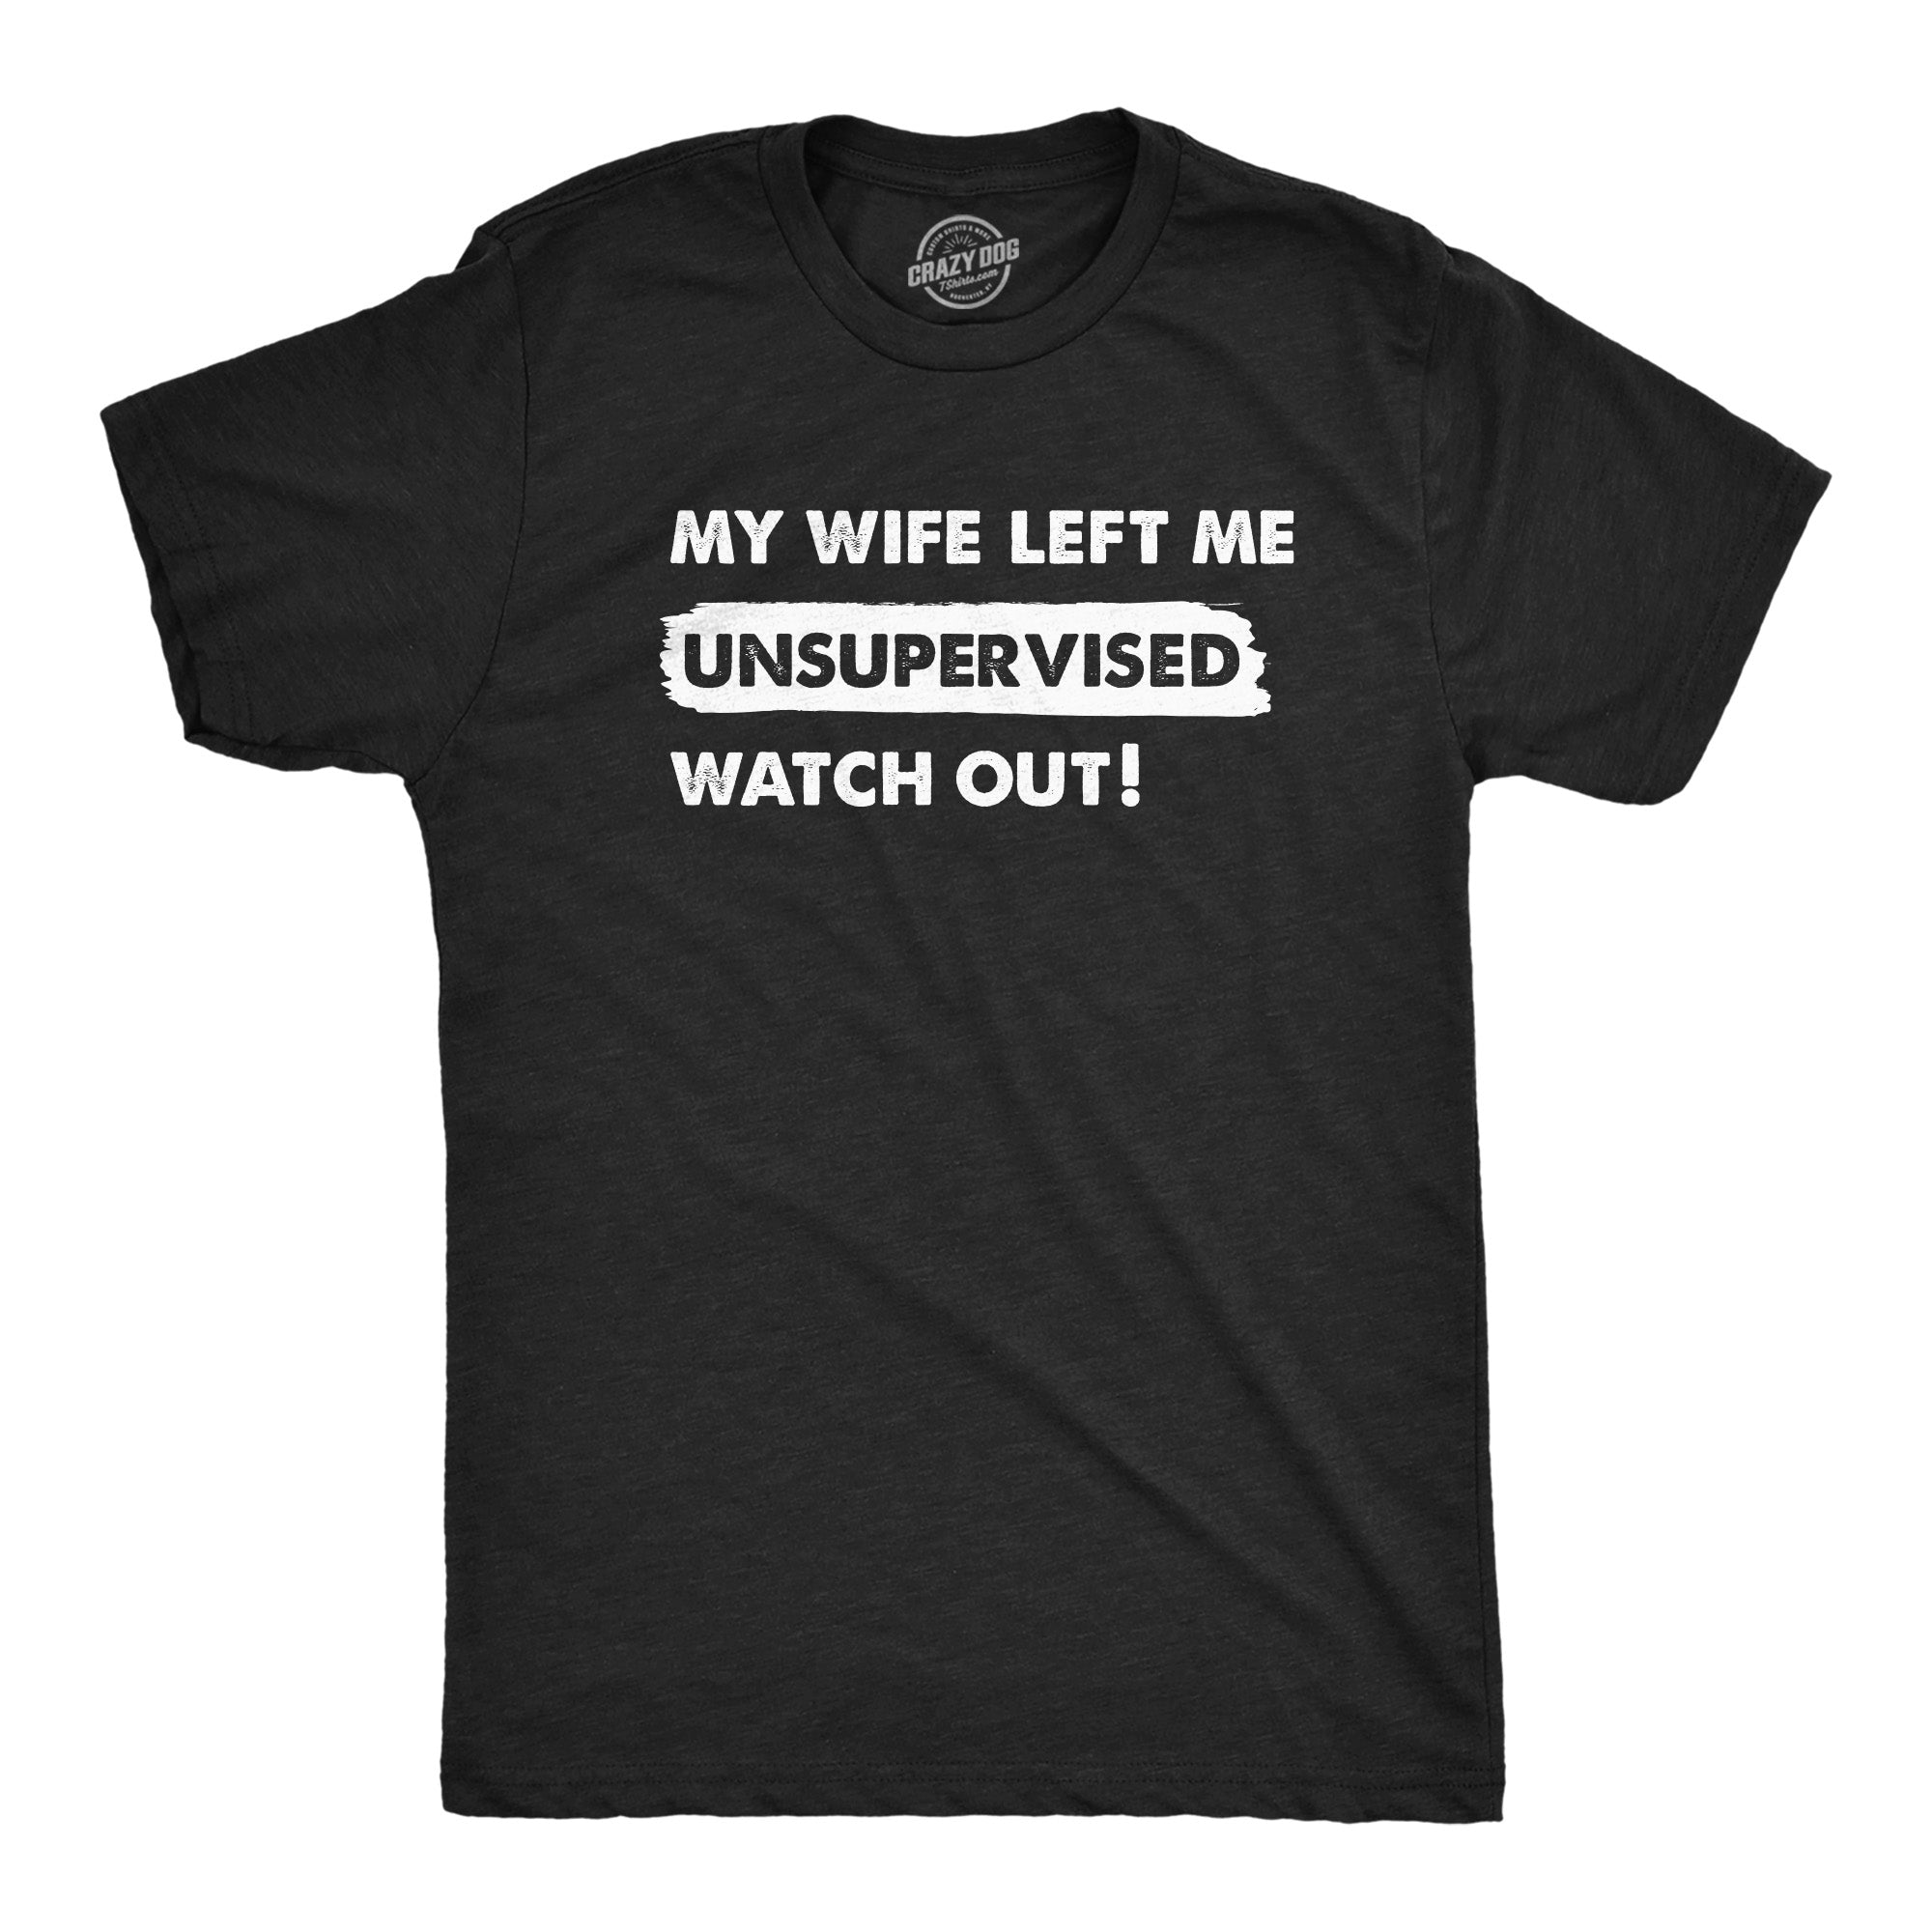 Funny Heather Black - WIFE My Wife Left Me Unsupervised Watch Out Mens T Shirt Nerdy Sarcastic Tee